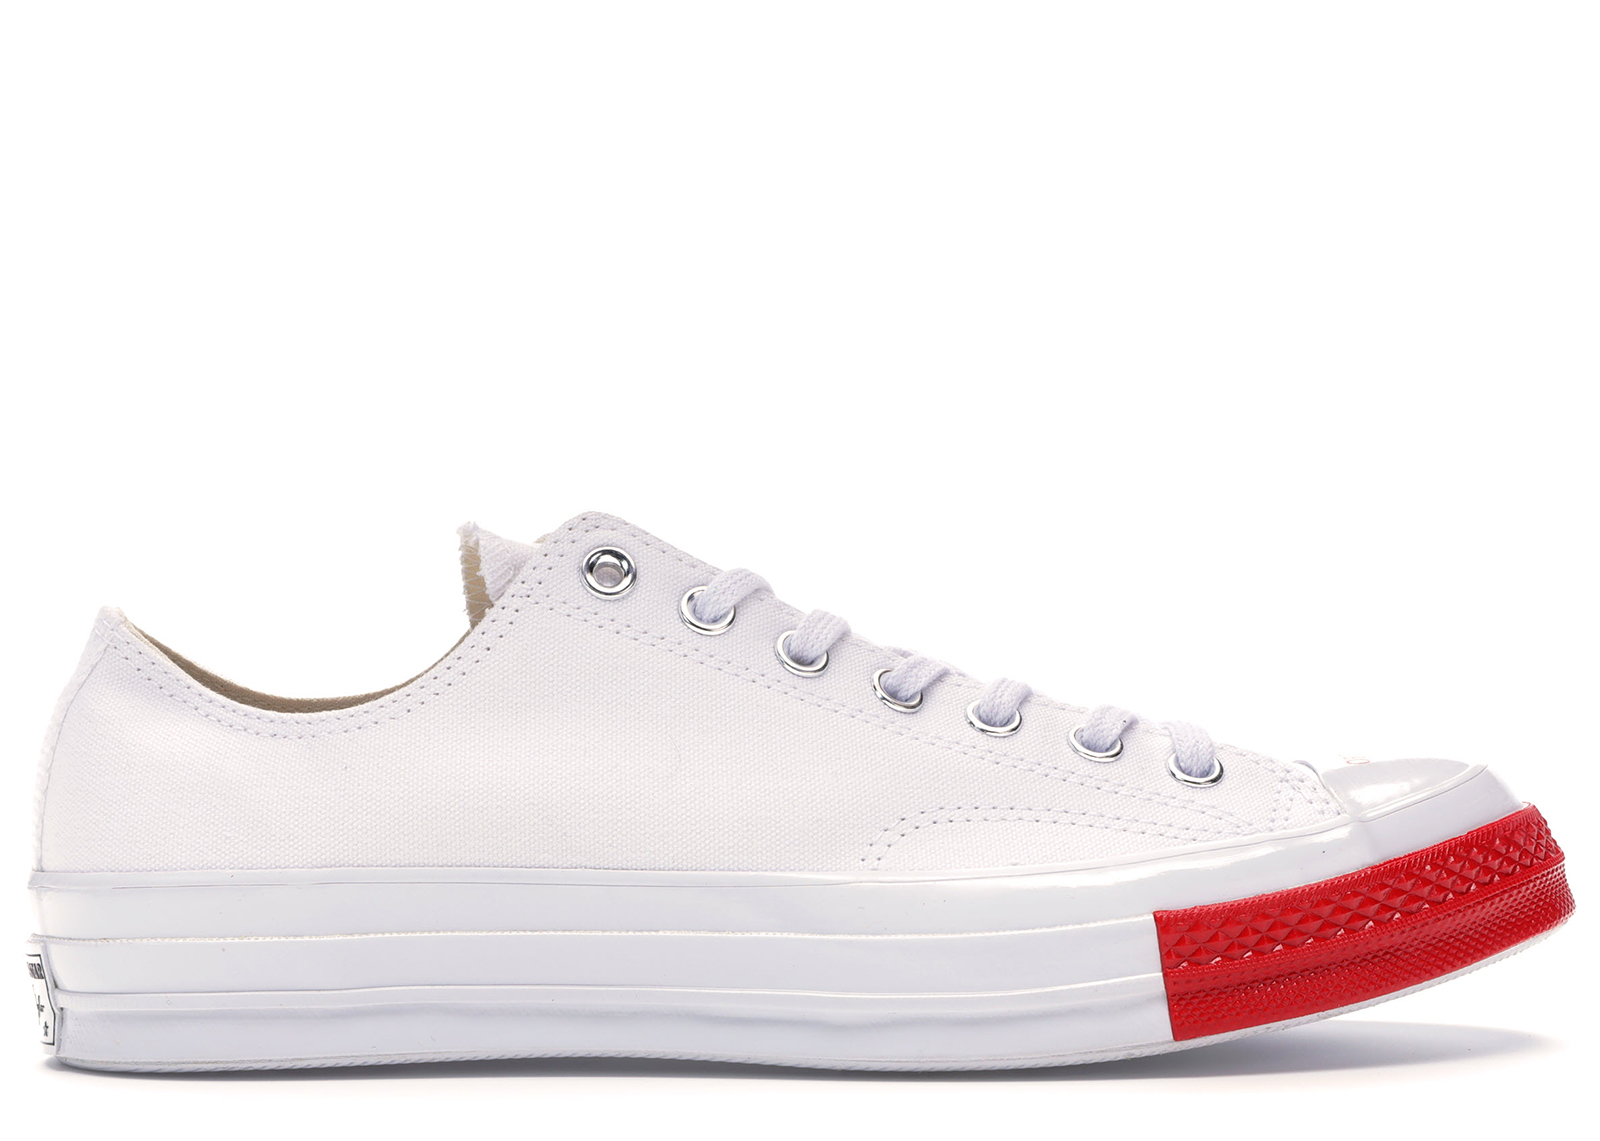 converse x undercover chuck taylor all star 70's ox low